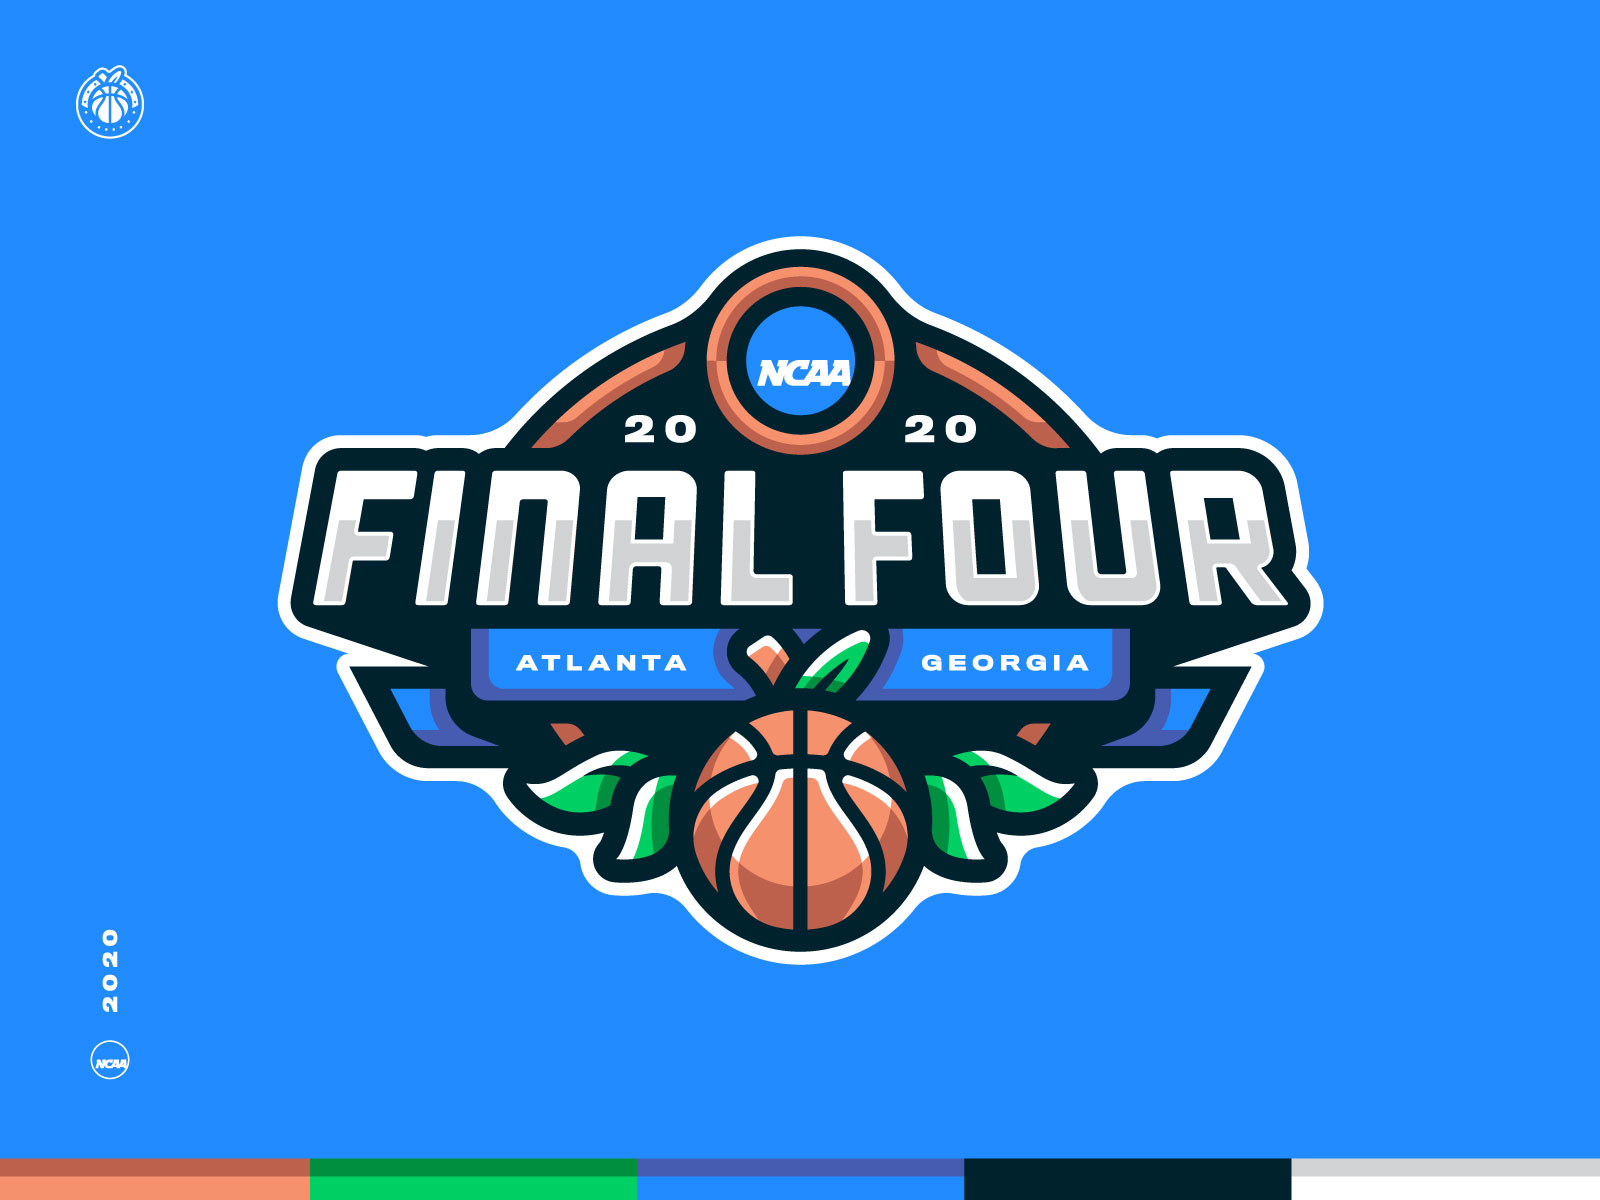 Final Four Games 2020 : 5 things we learned from Game 1 of 2020 Finals